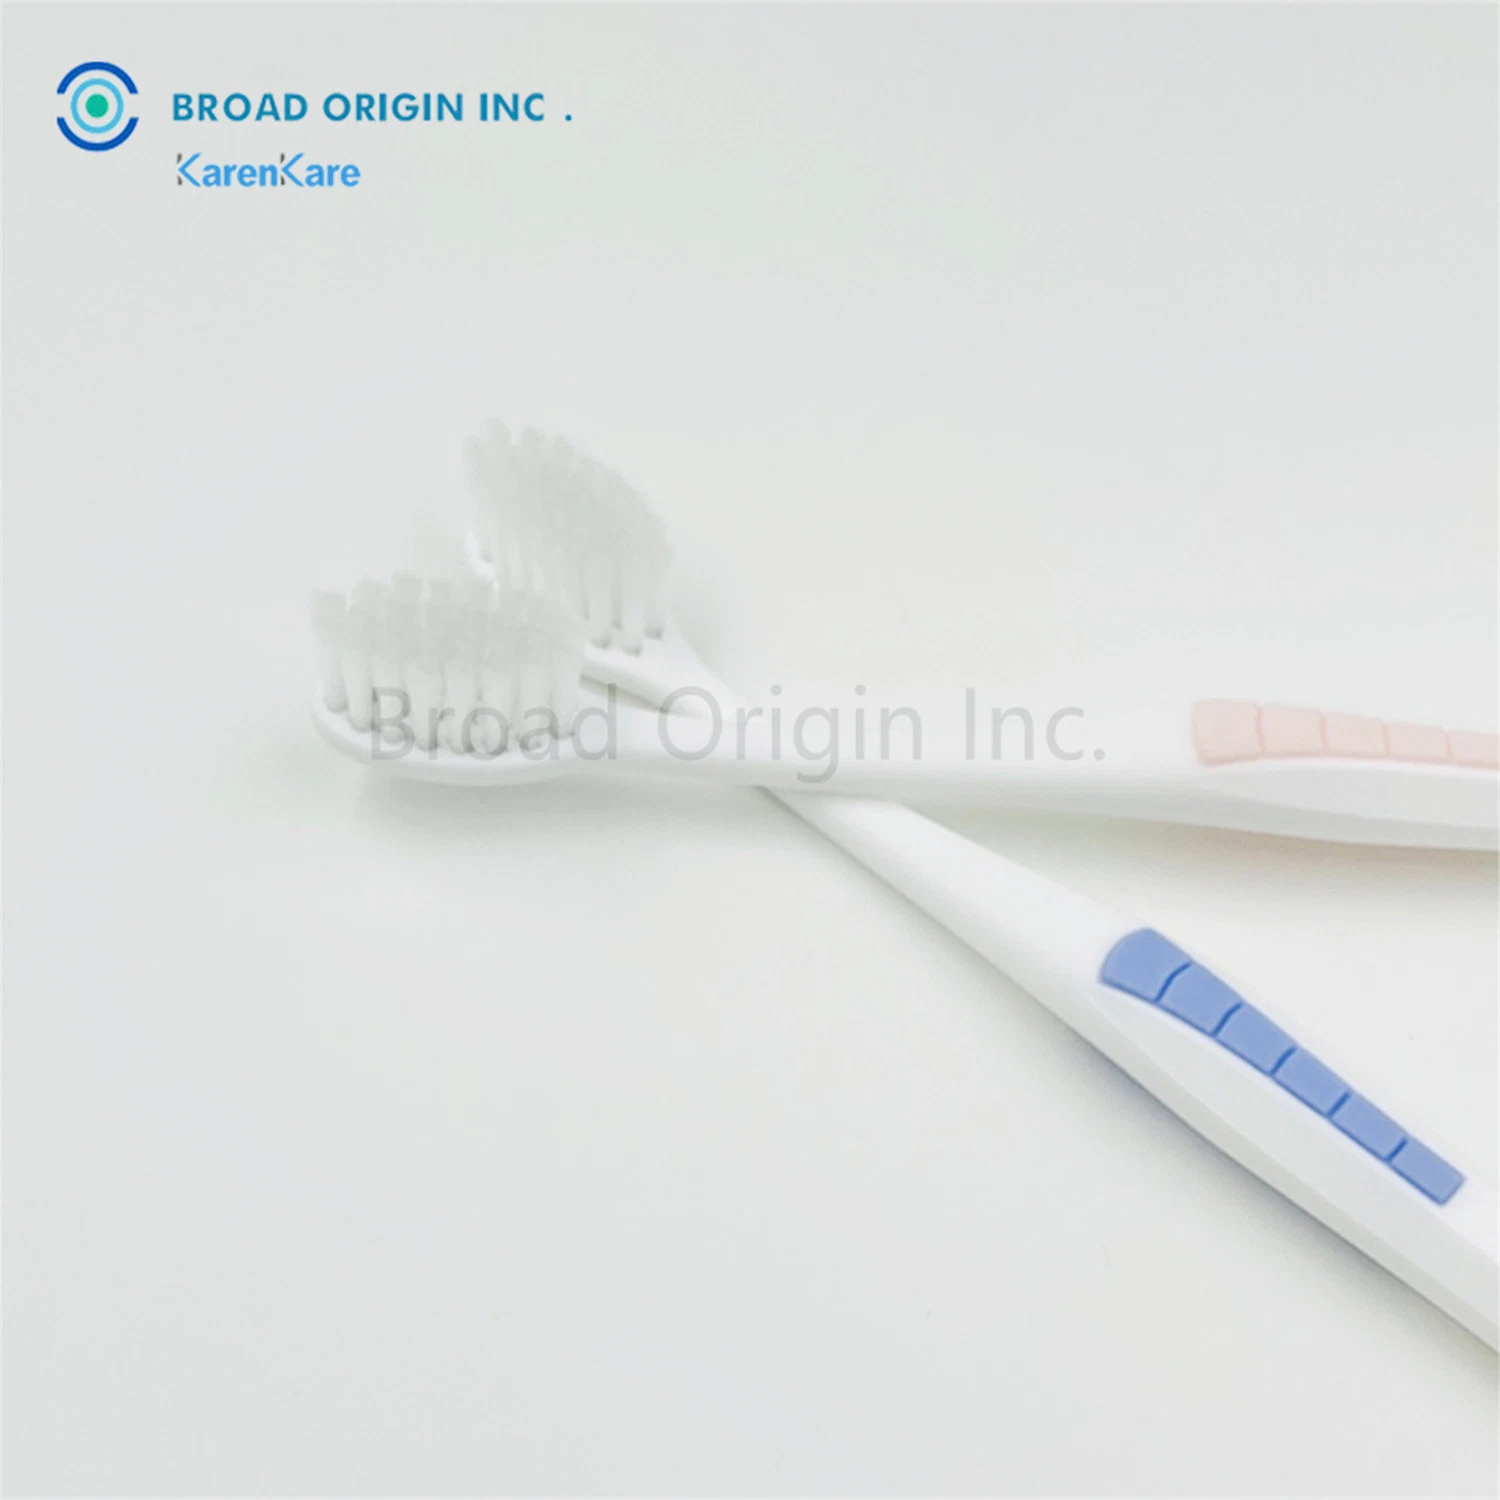 Toothbrush Soft Firm Plastic PBT Bristles for Toothbrushes Personal Dentel Care